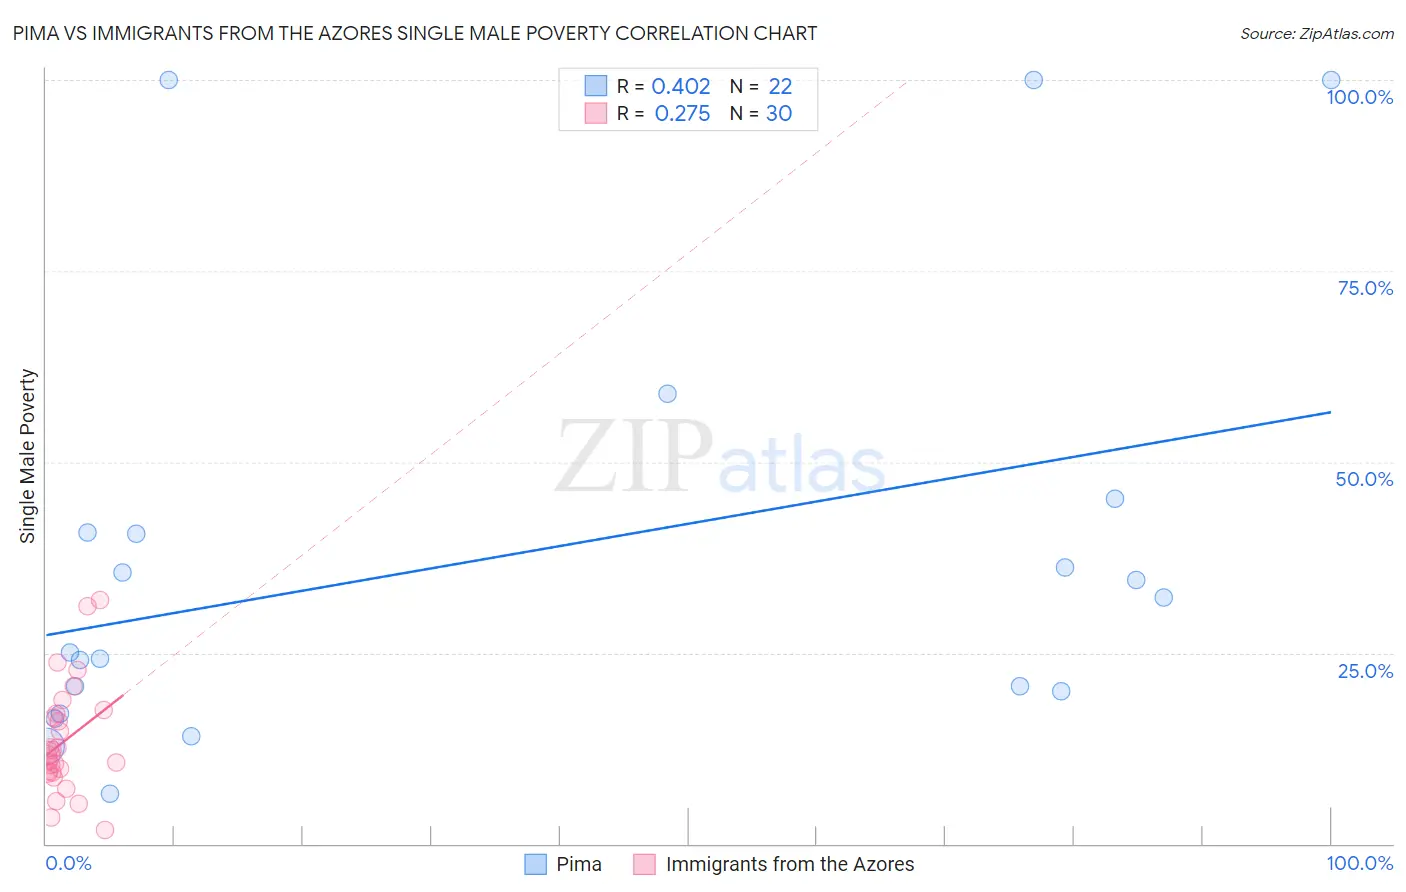 Pima vs Immigrants from the Azores Single Male Poverty